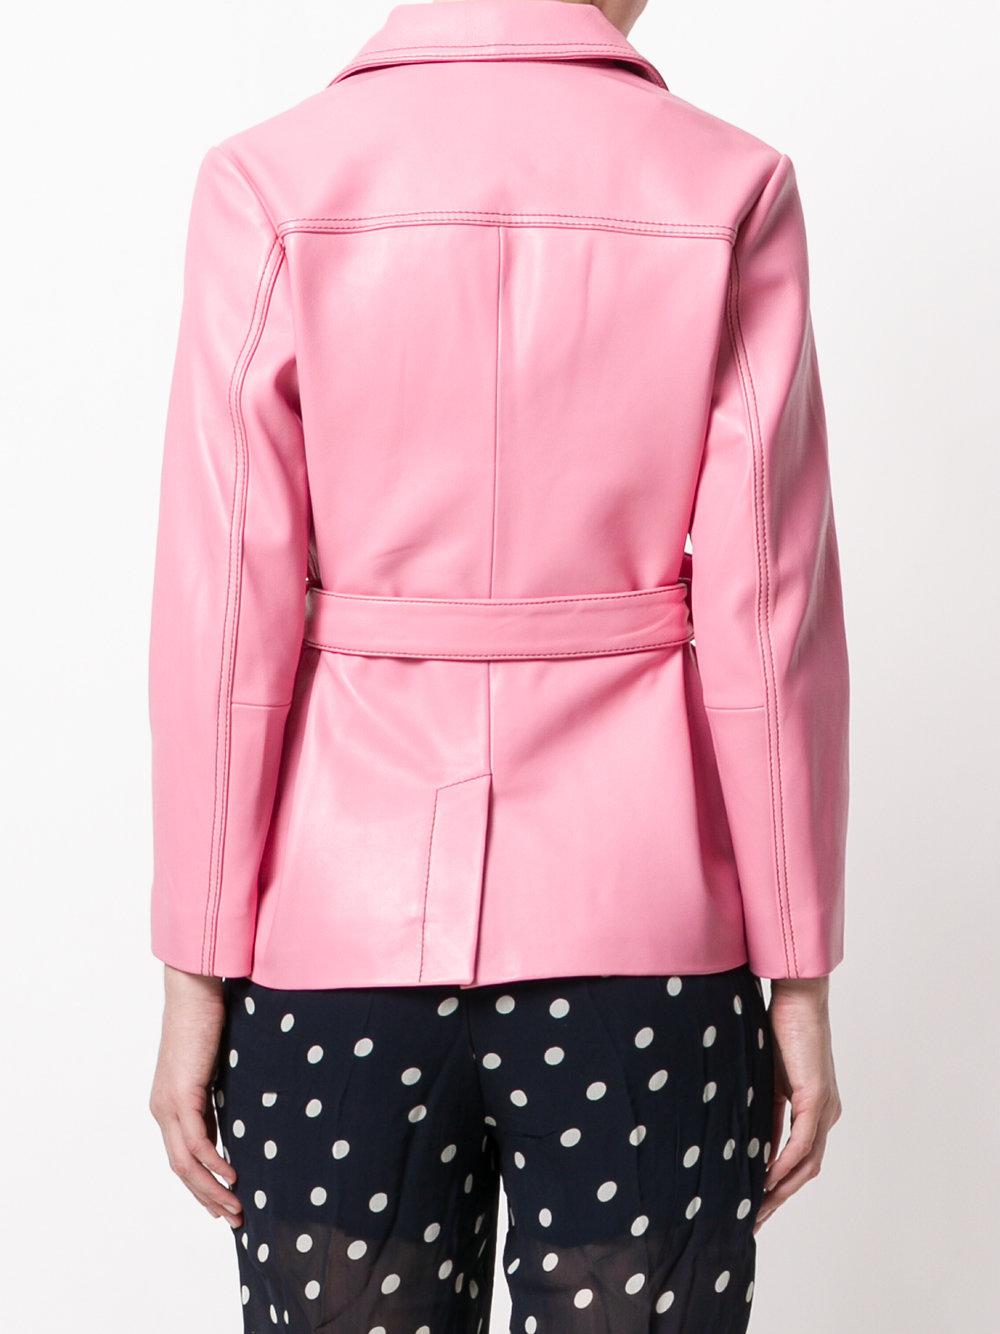 Ganni Passion Leather Jacket in Pink & Purple (Pink) - Lyst